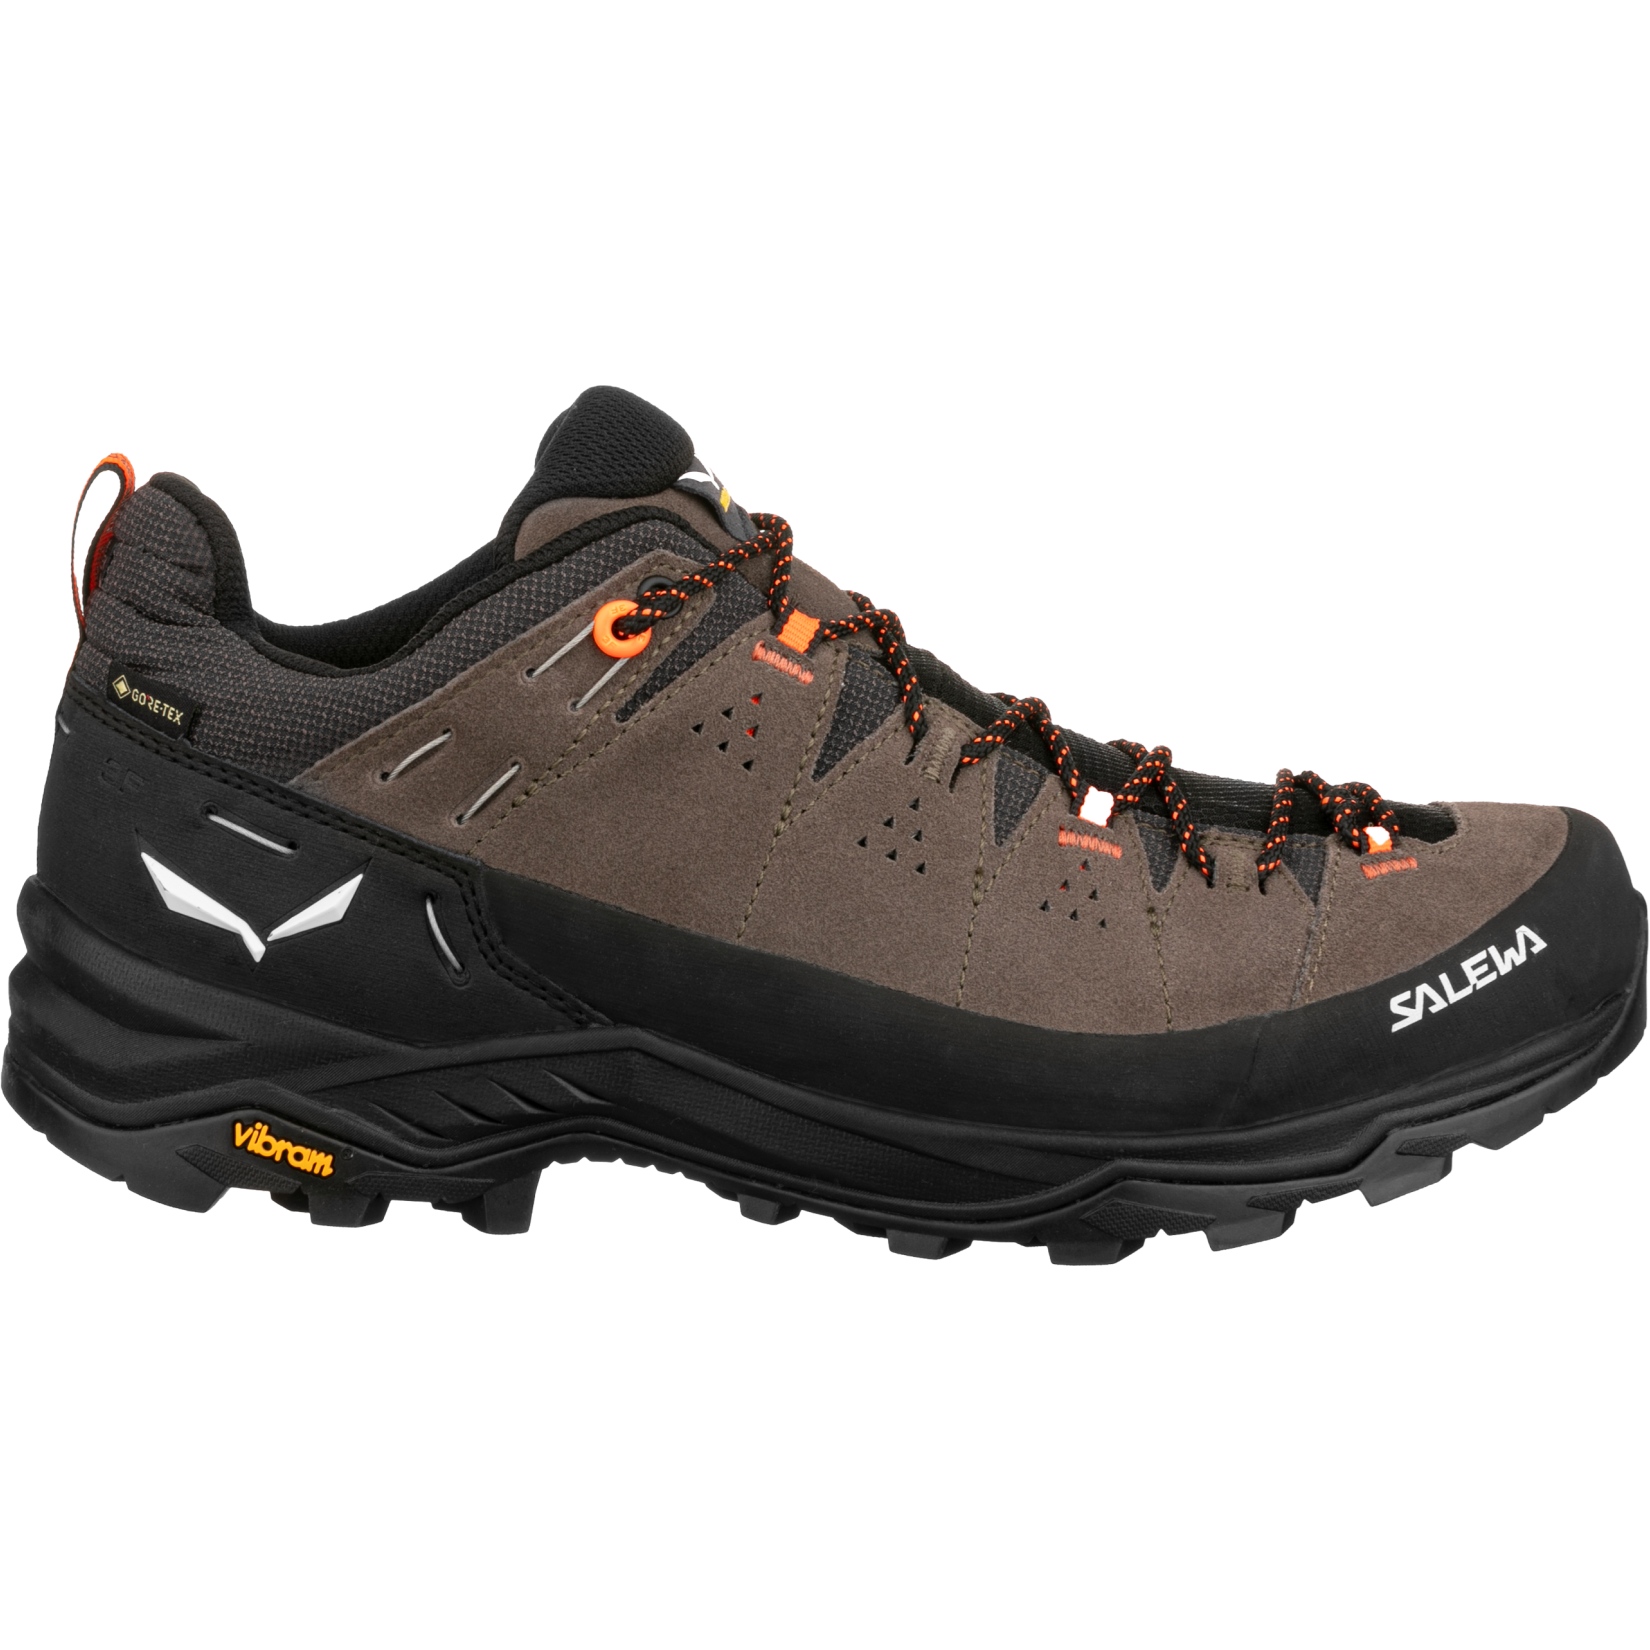 Picture of Salewa Alp Trainer 2 GTX Hiking Shoes - bungee cord/black 7953